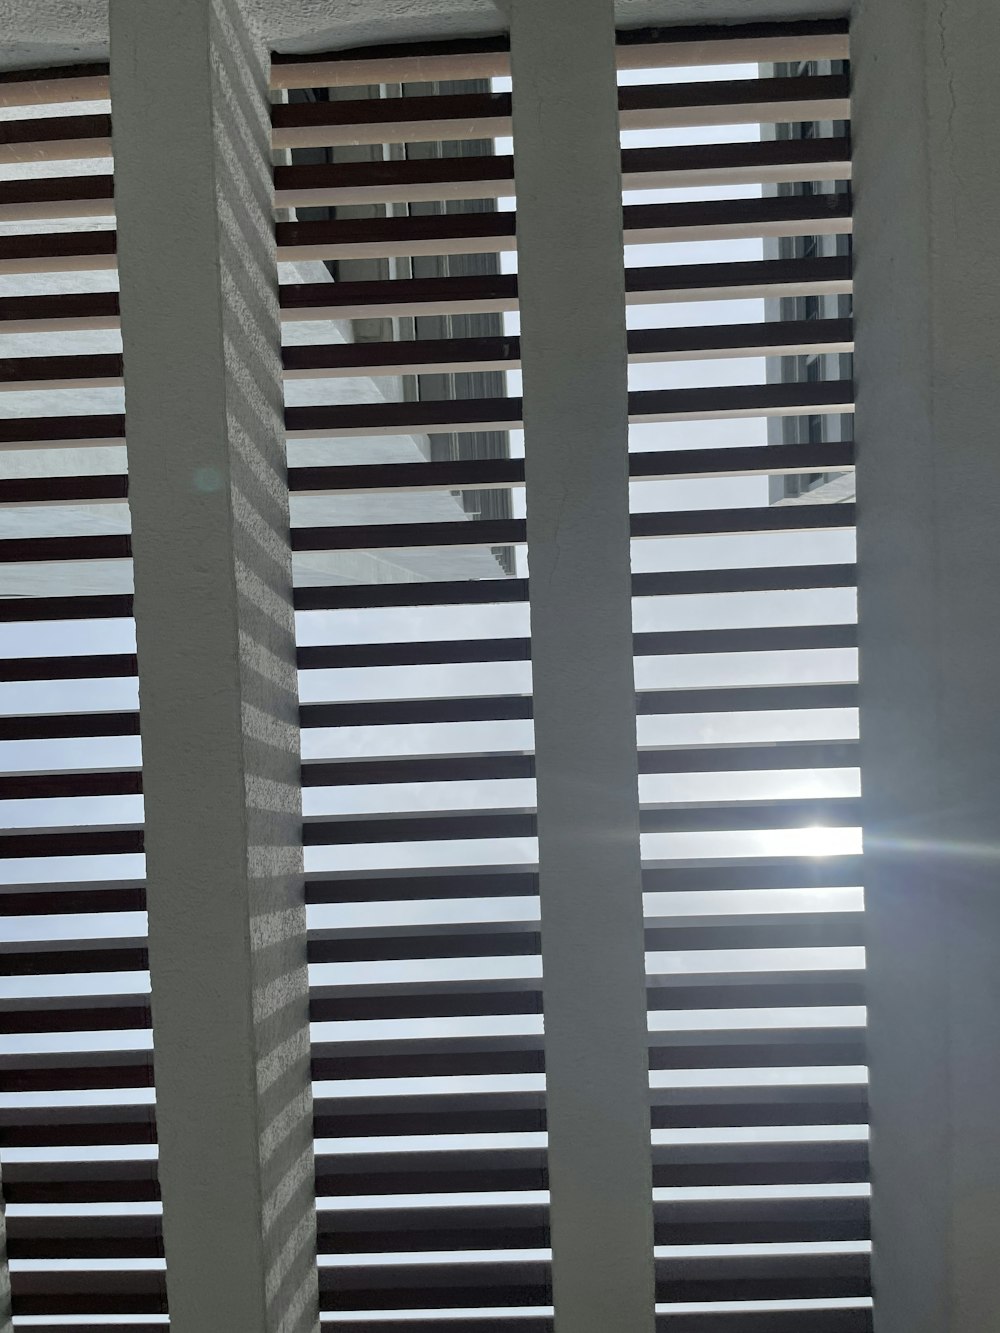 the sun is shining through the blinds of a window